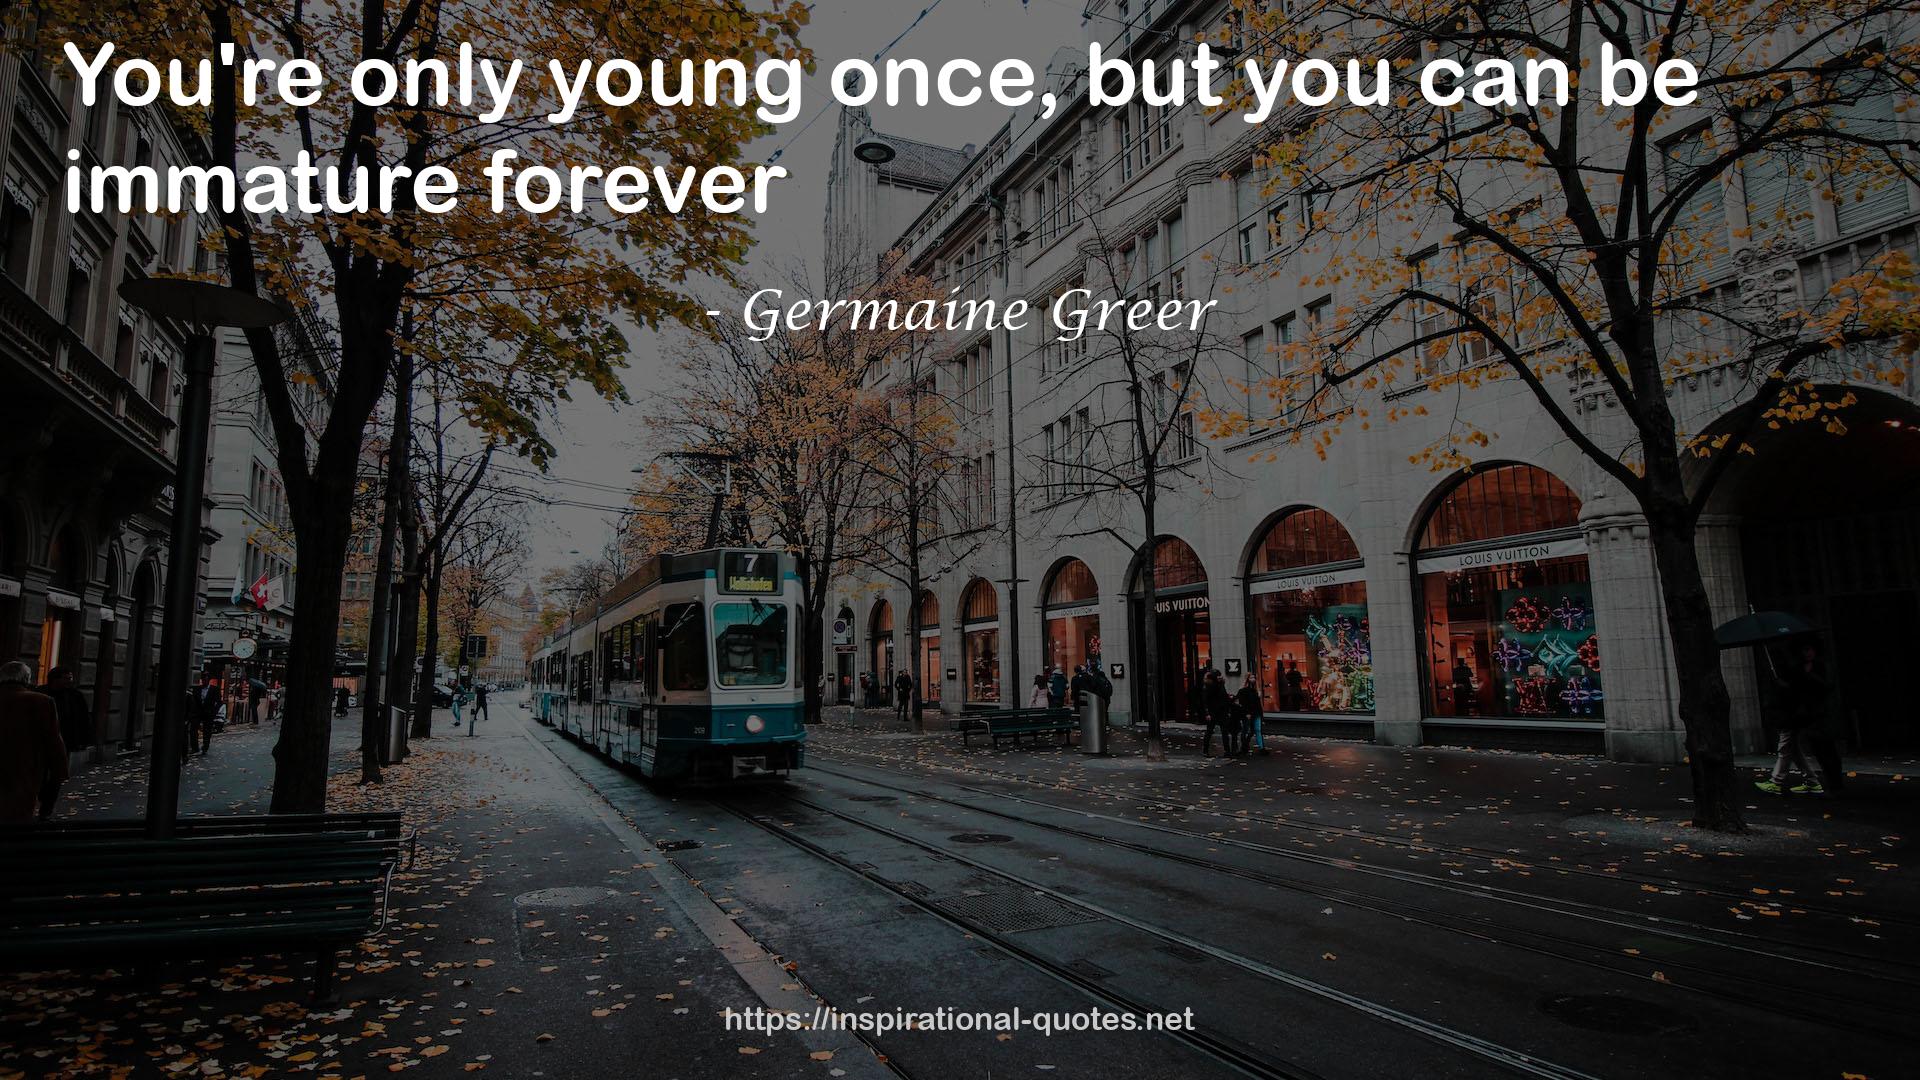 Germaine Greer QUOTES